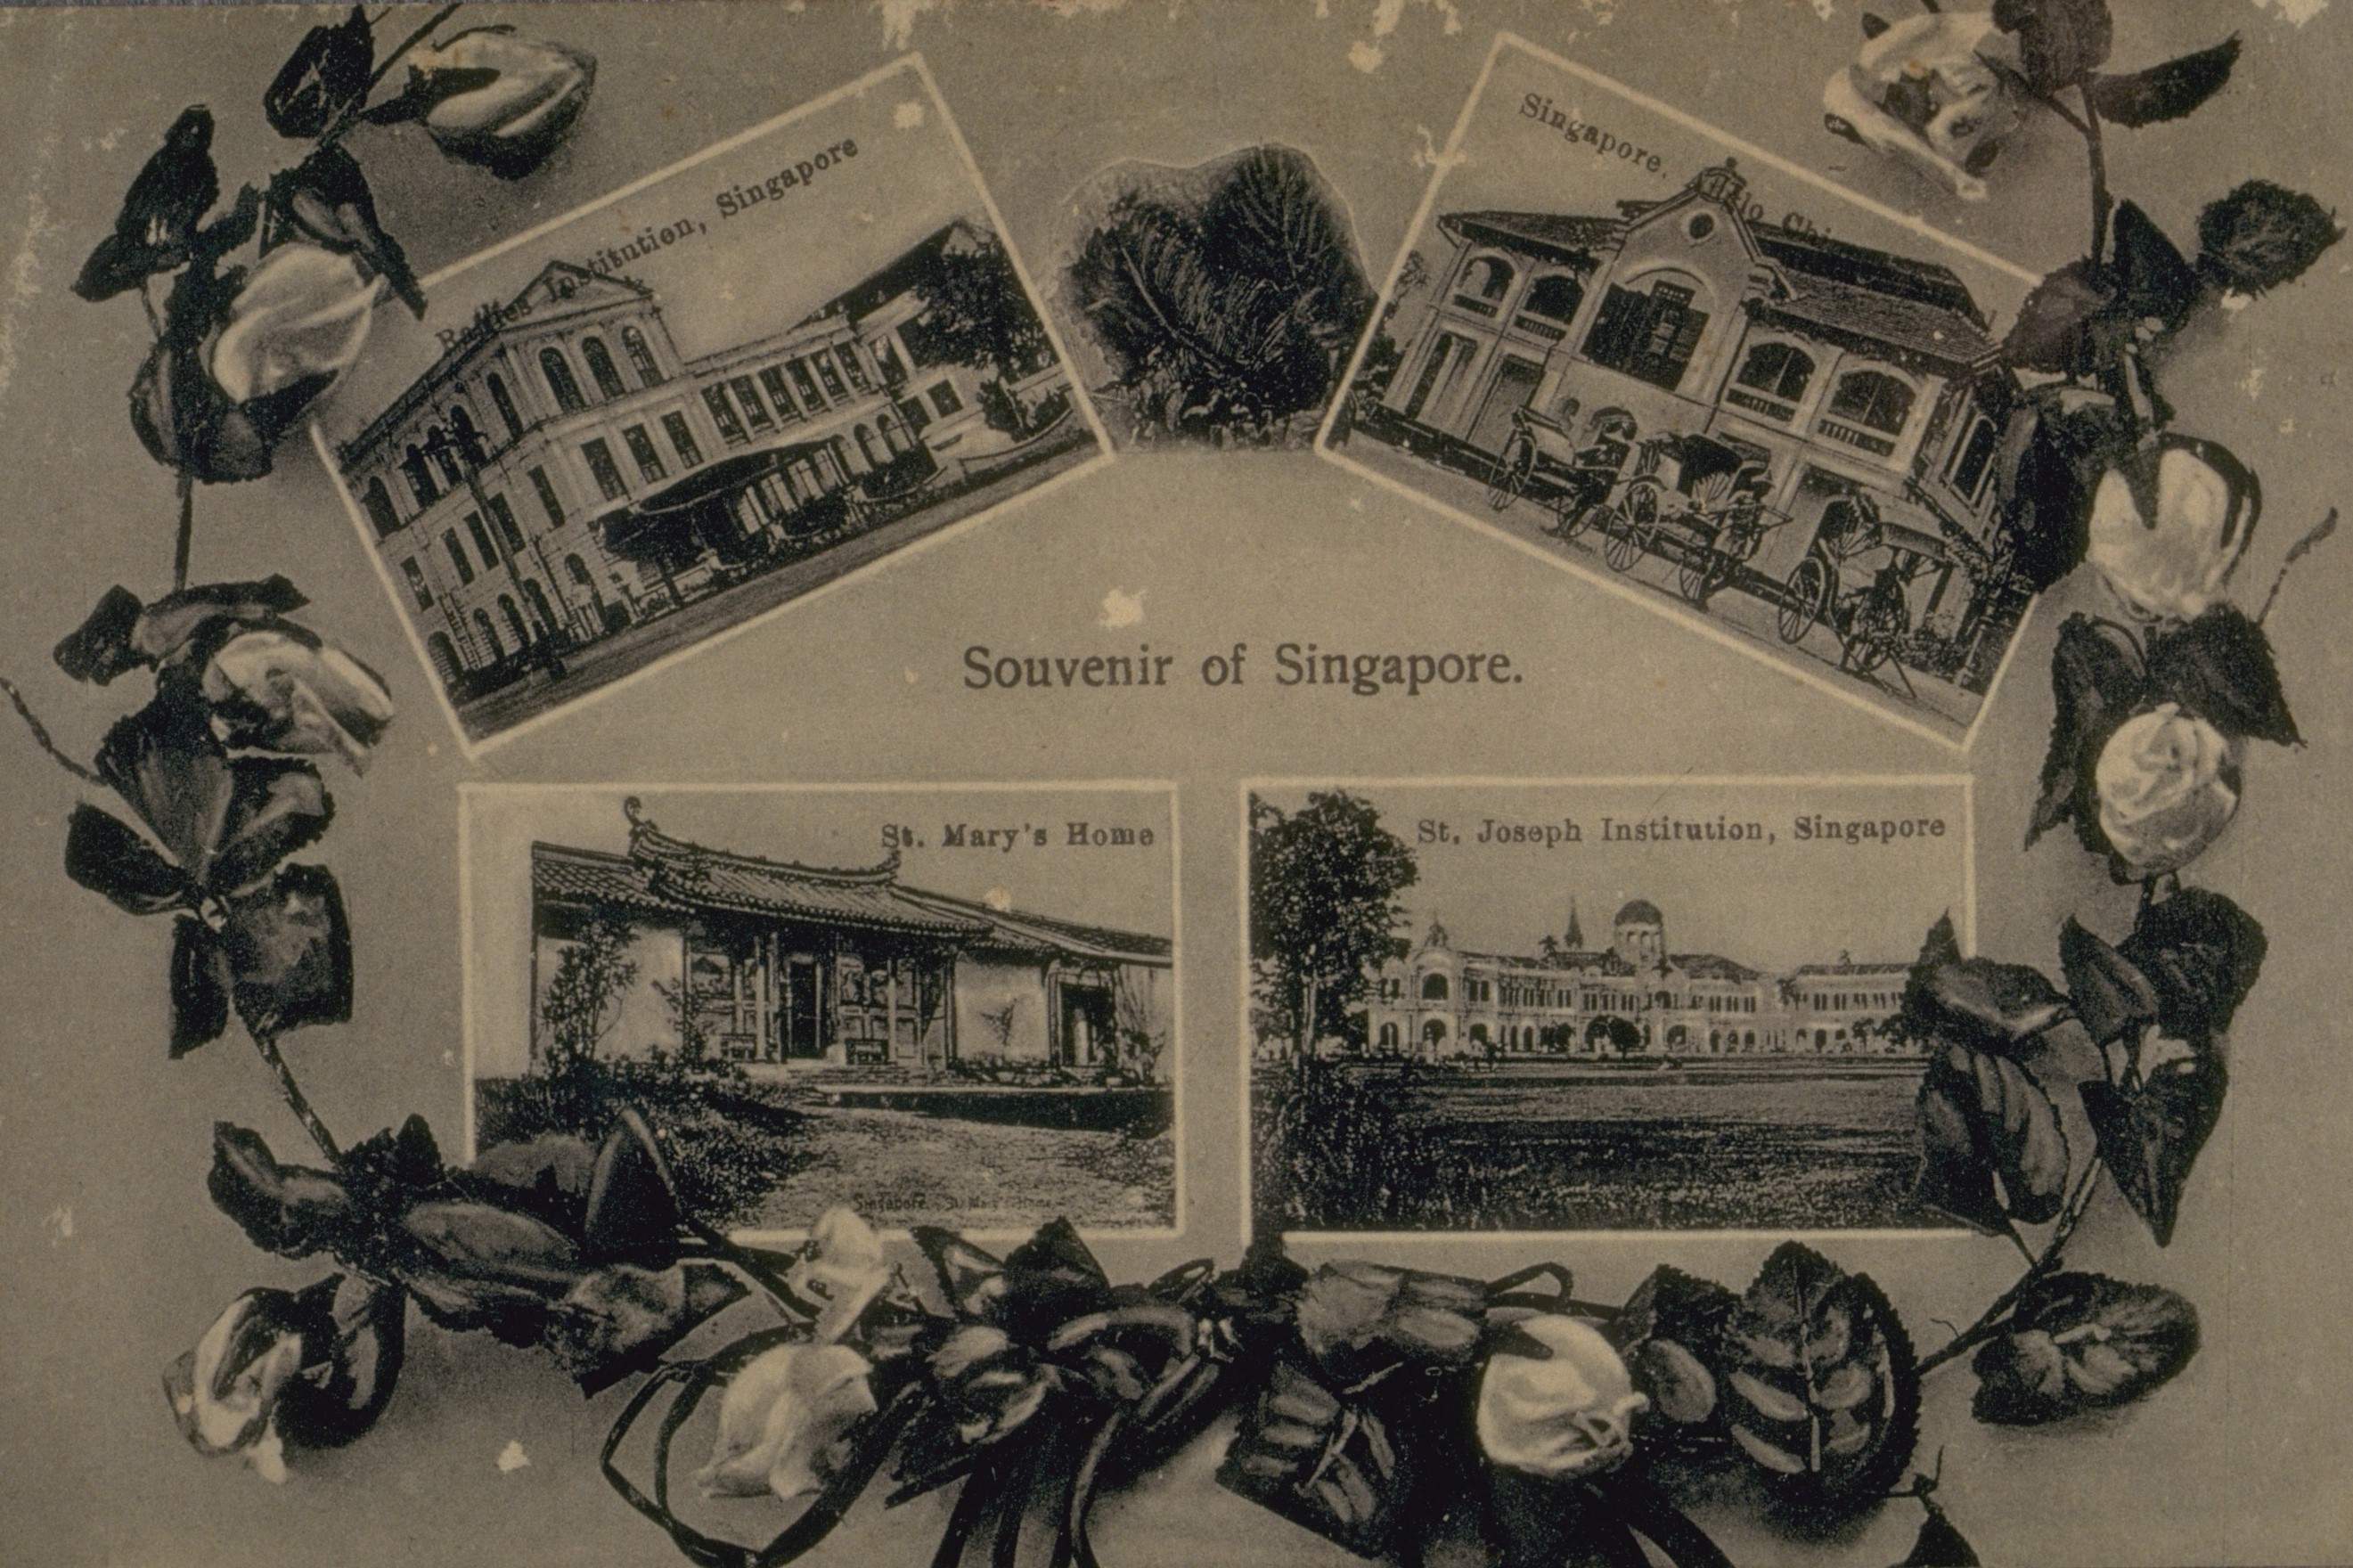 Multiview picture postcard featuring four institutions of learning in Singapore: Raffles Institution, Anglo Chinese School, St. Mary's Home and School, and St Joseph Institution